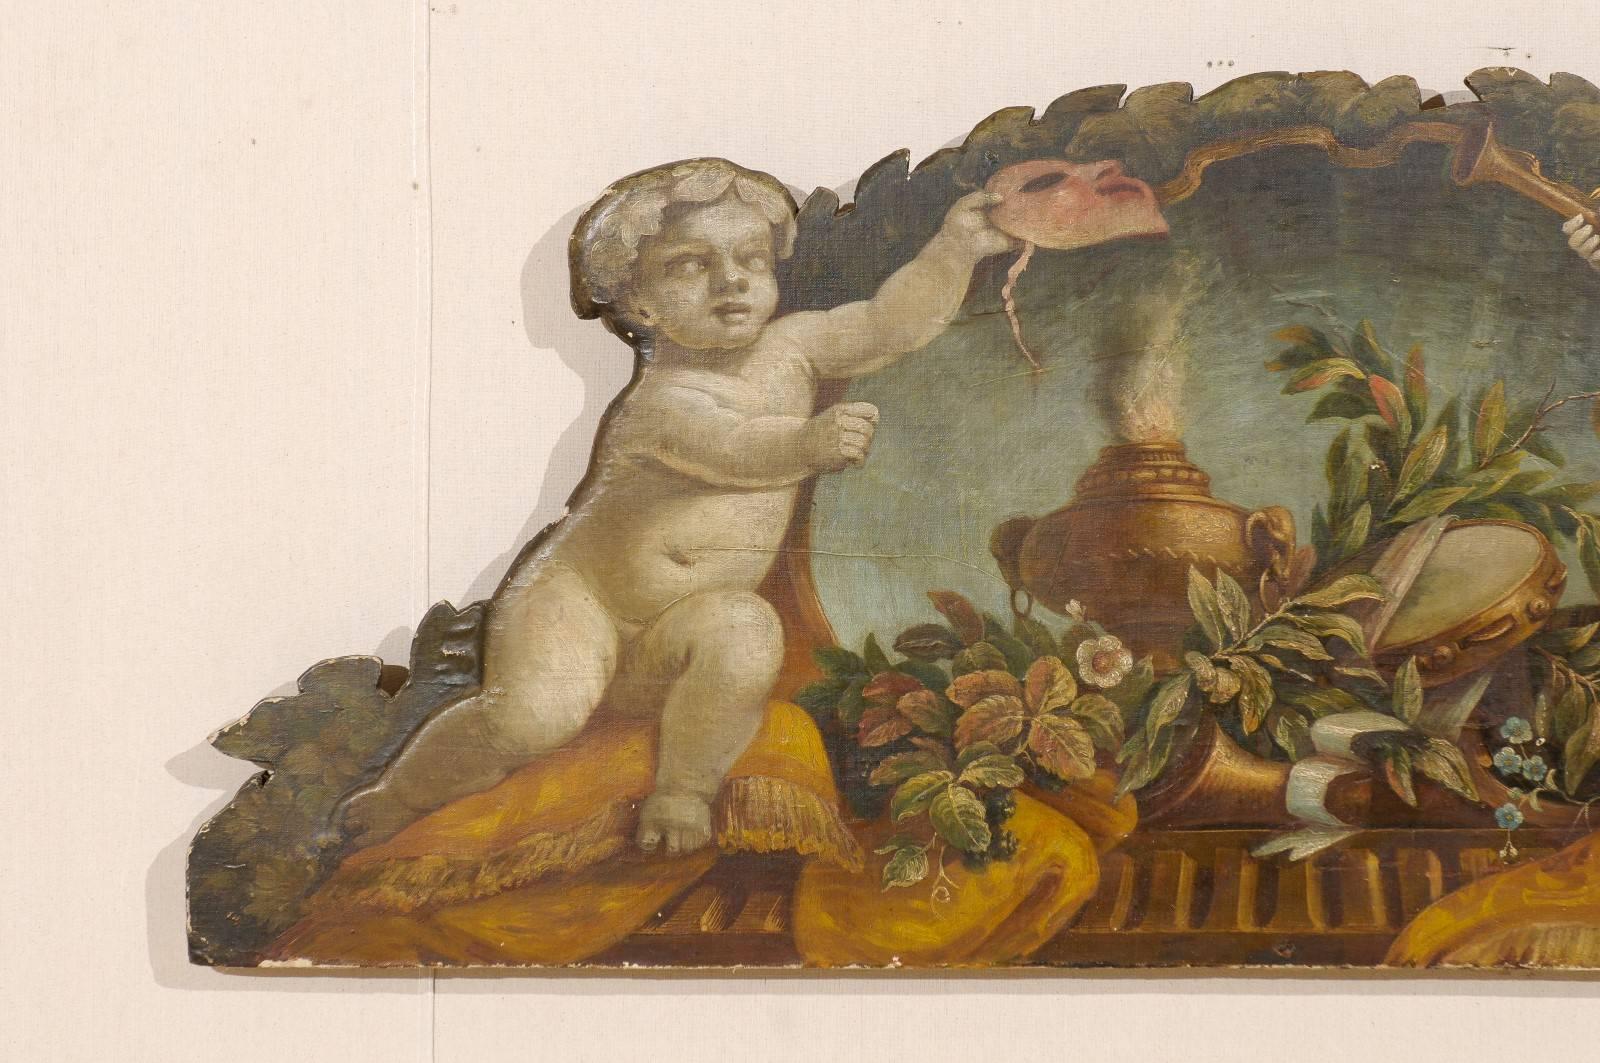 Carved Exquisite 19th Century Italian Panel Featuring Allegories of Music and Theater